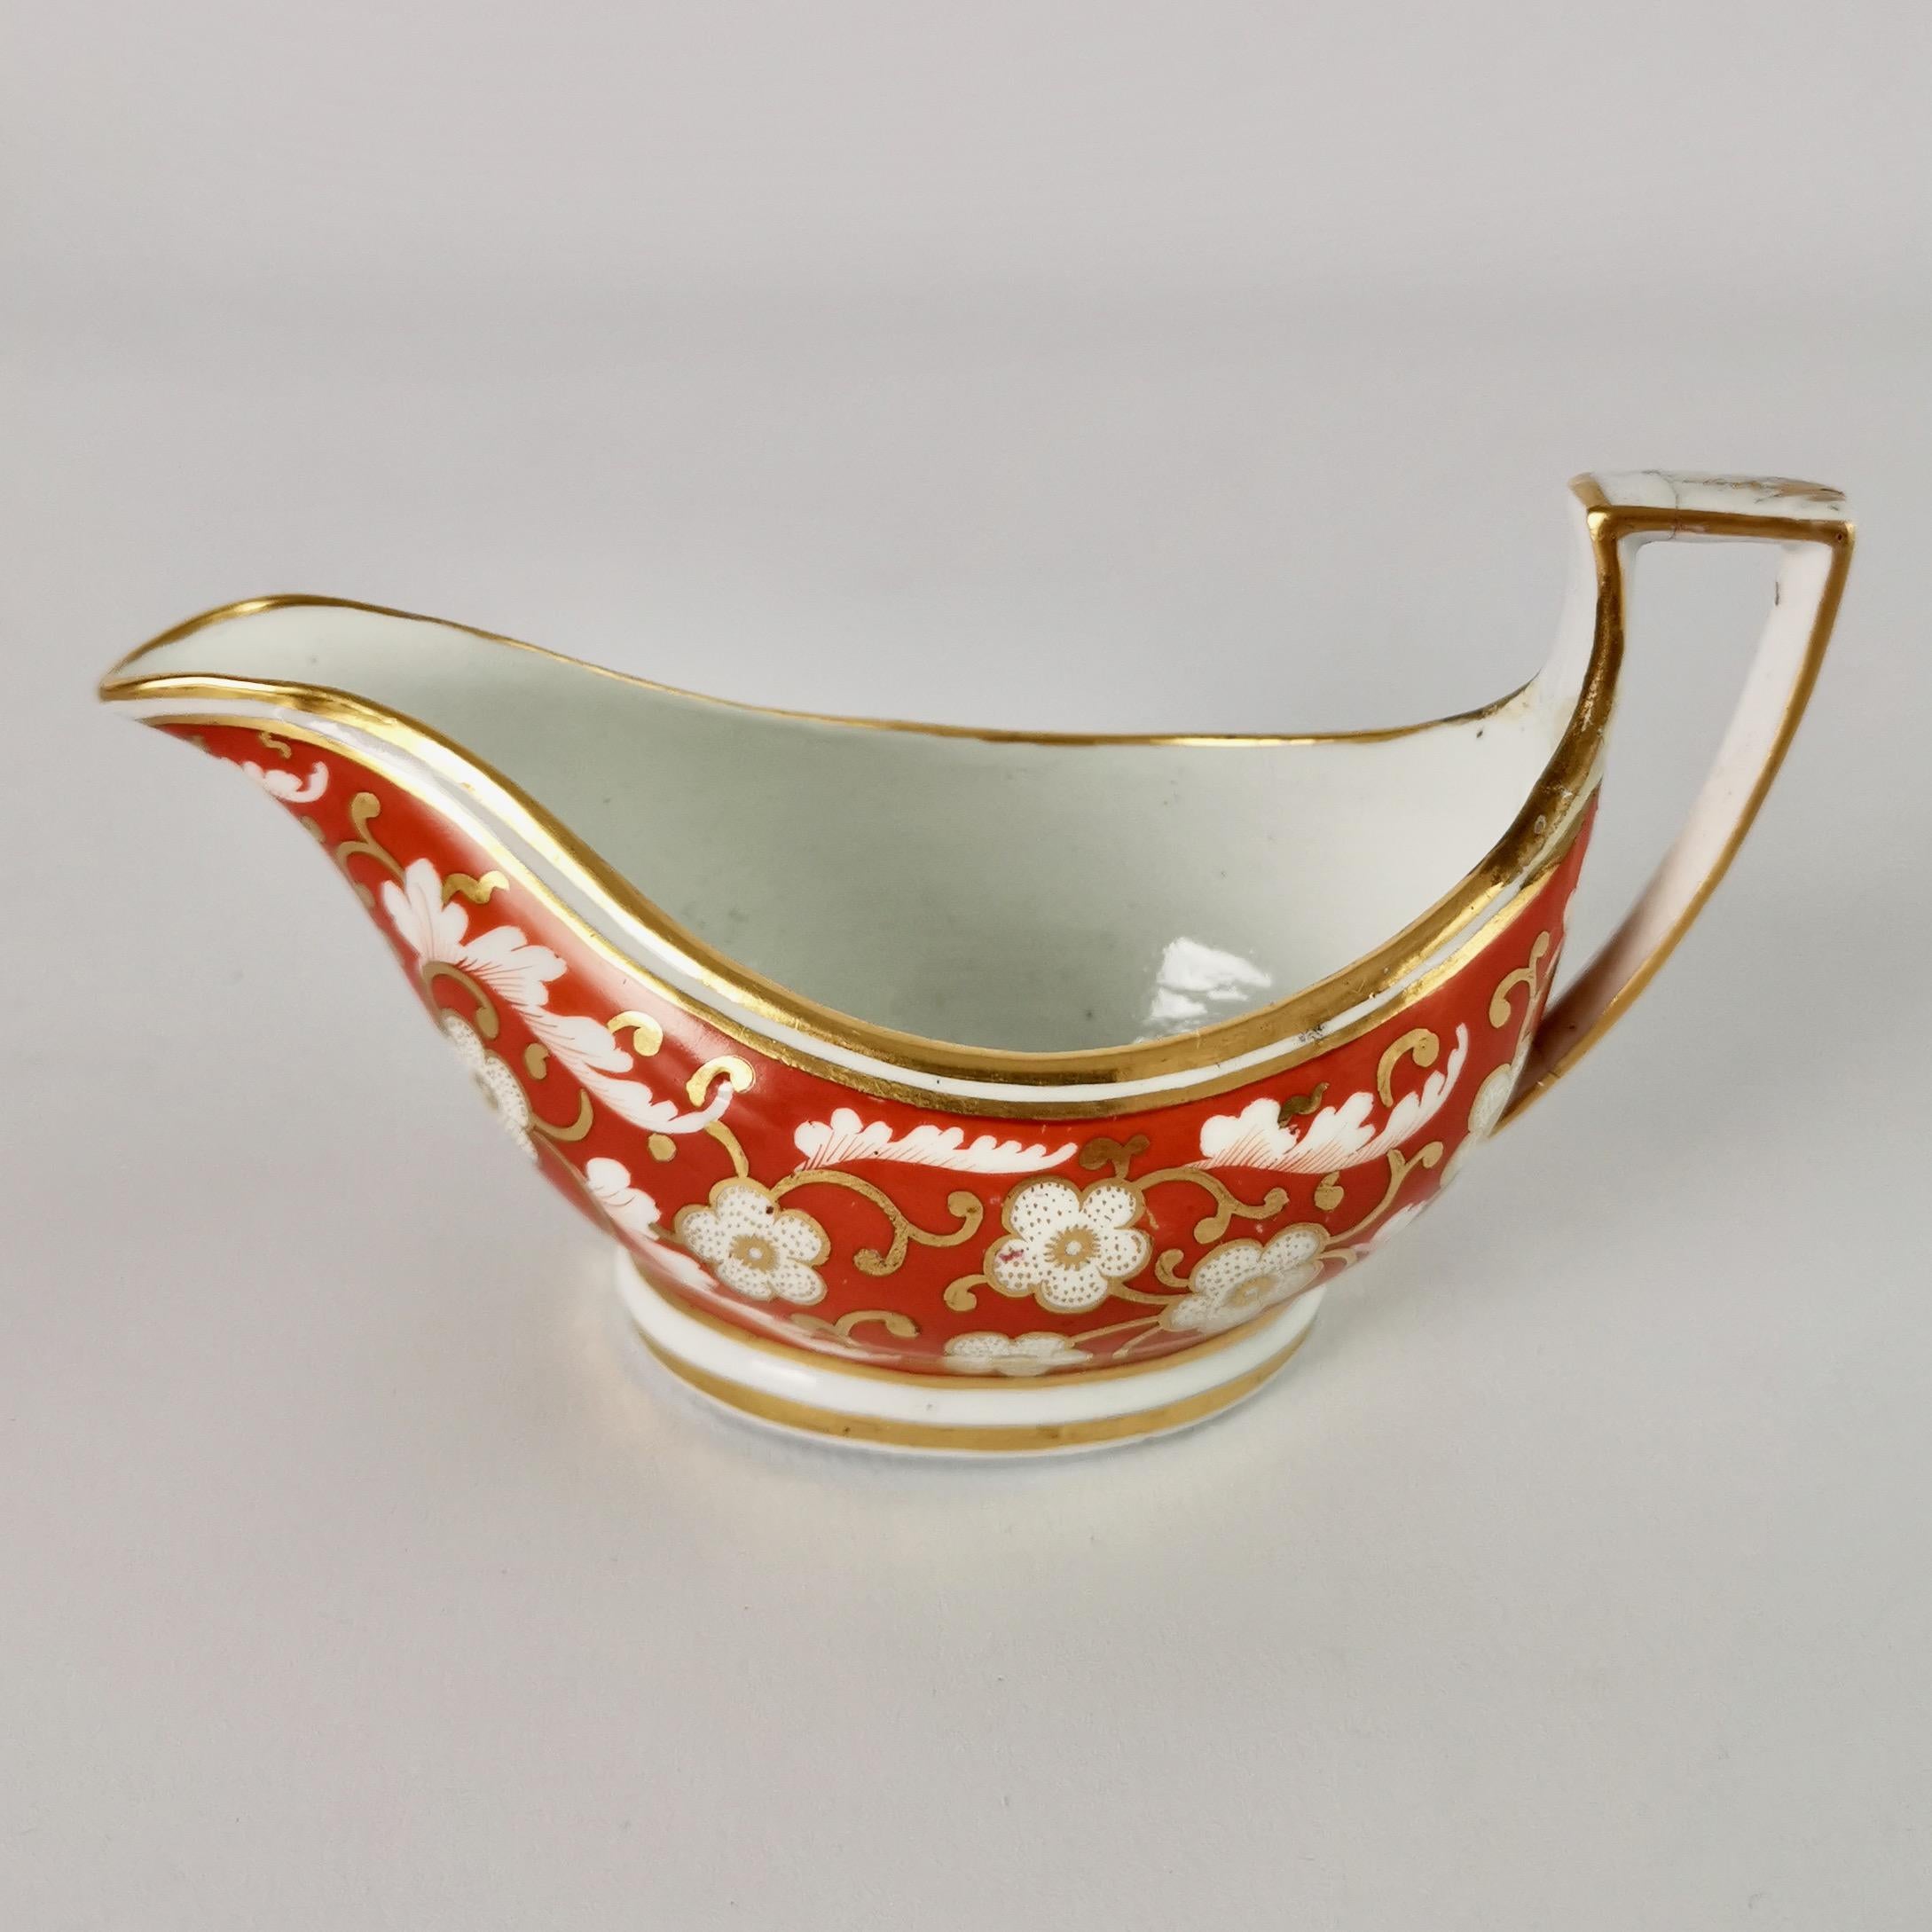 Hand-Painted Chamberlains Worcester Tiny Tea Service for Two, Orange Floral, Regency ca 1805